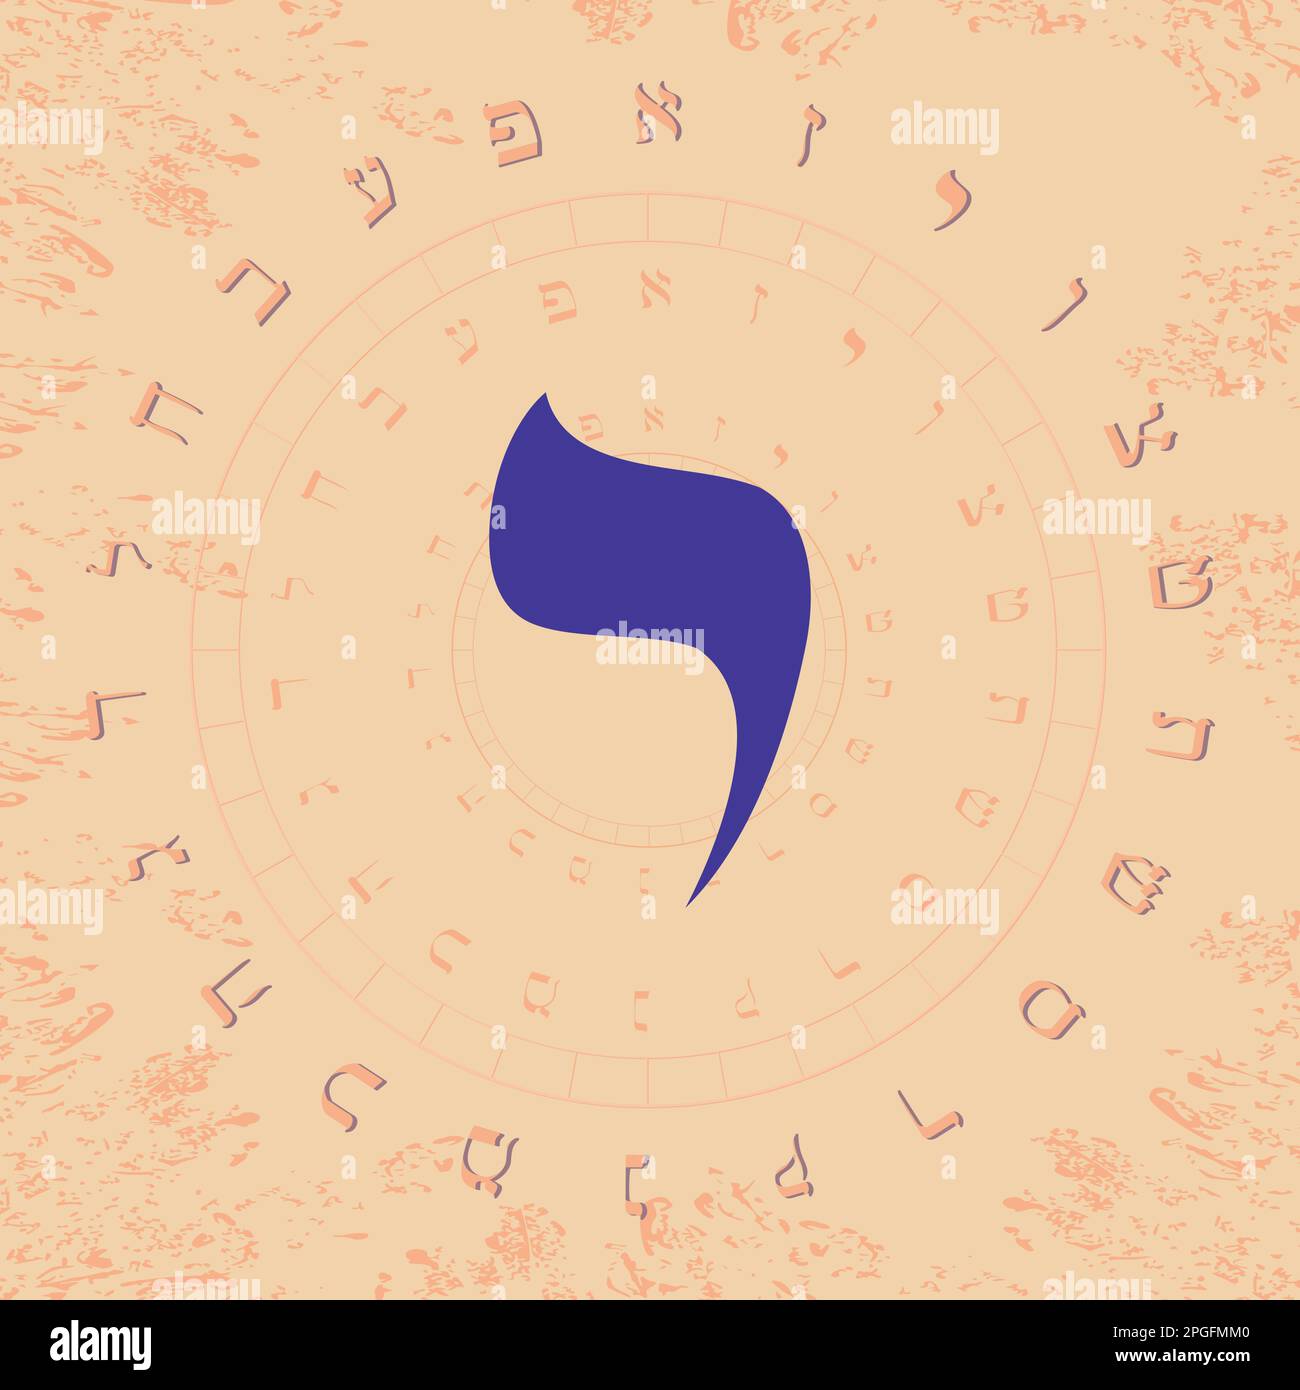 Vector illustration of the Hebrew alphabet in circular design. Hebrew letter called Yod large and blue. Stock Vector